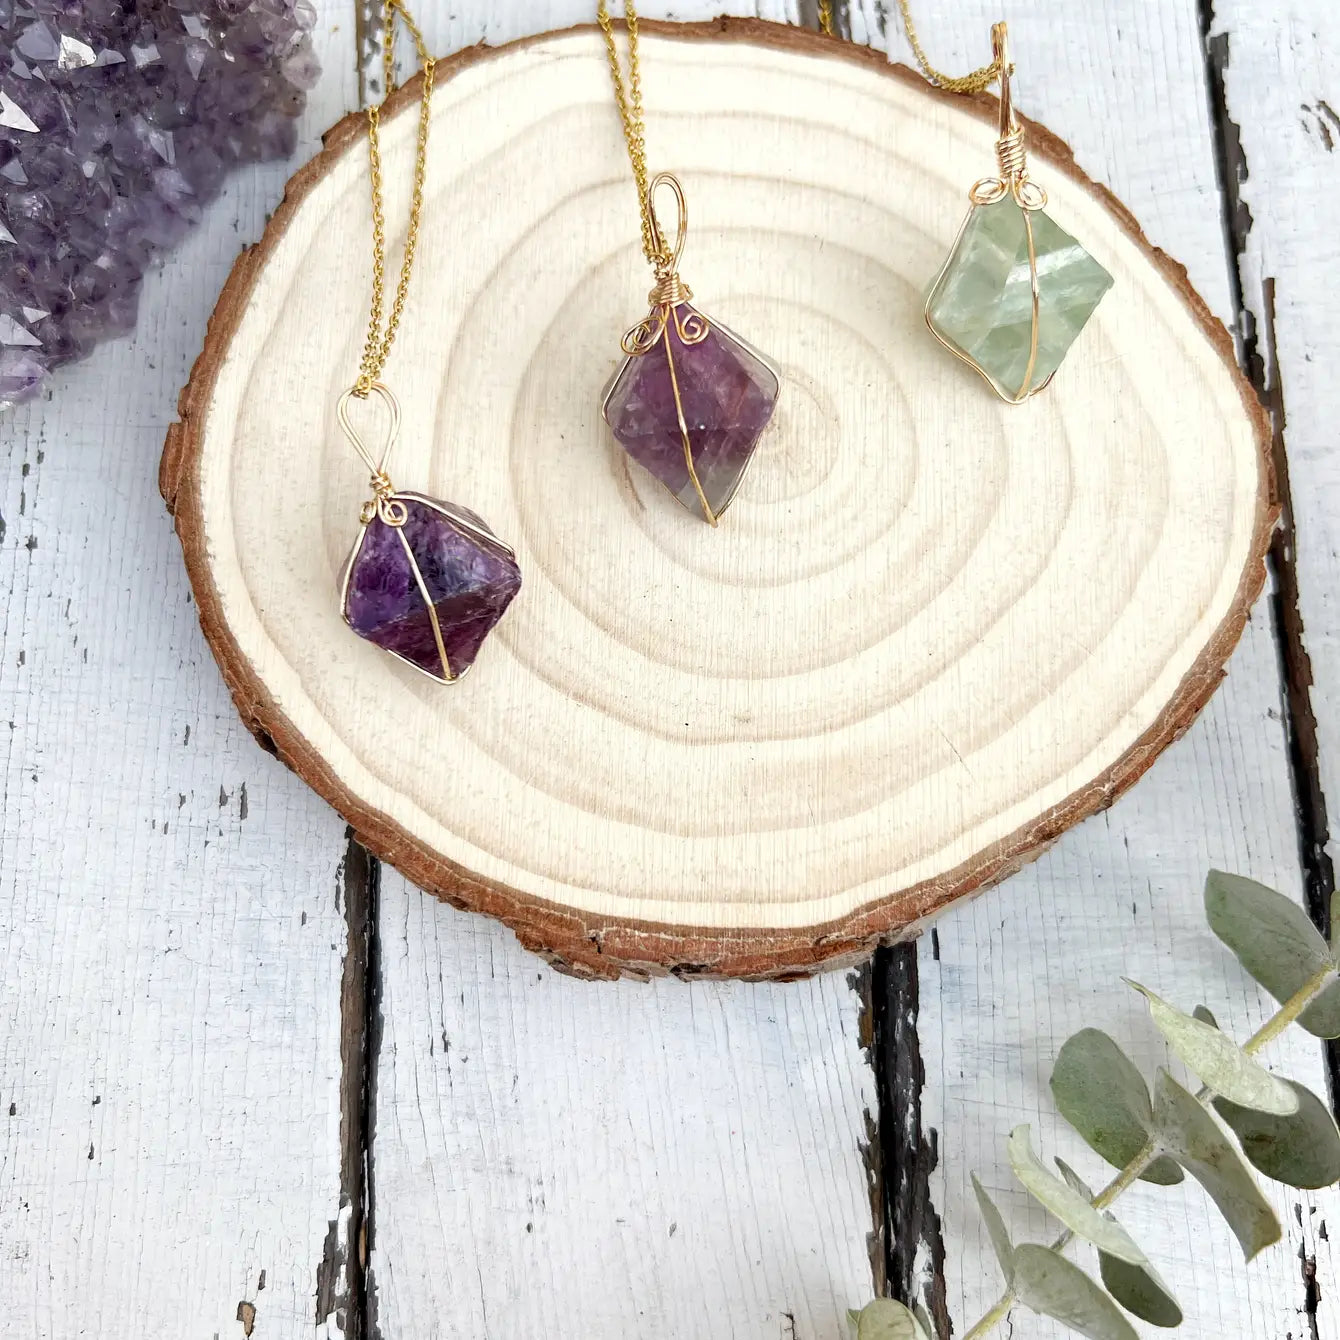 Raw Fluorite Wire Wrapped Necklace - Assortment 6 Pcs